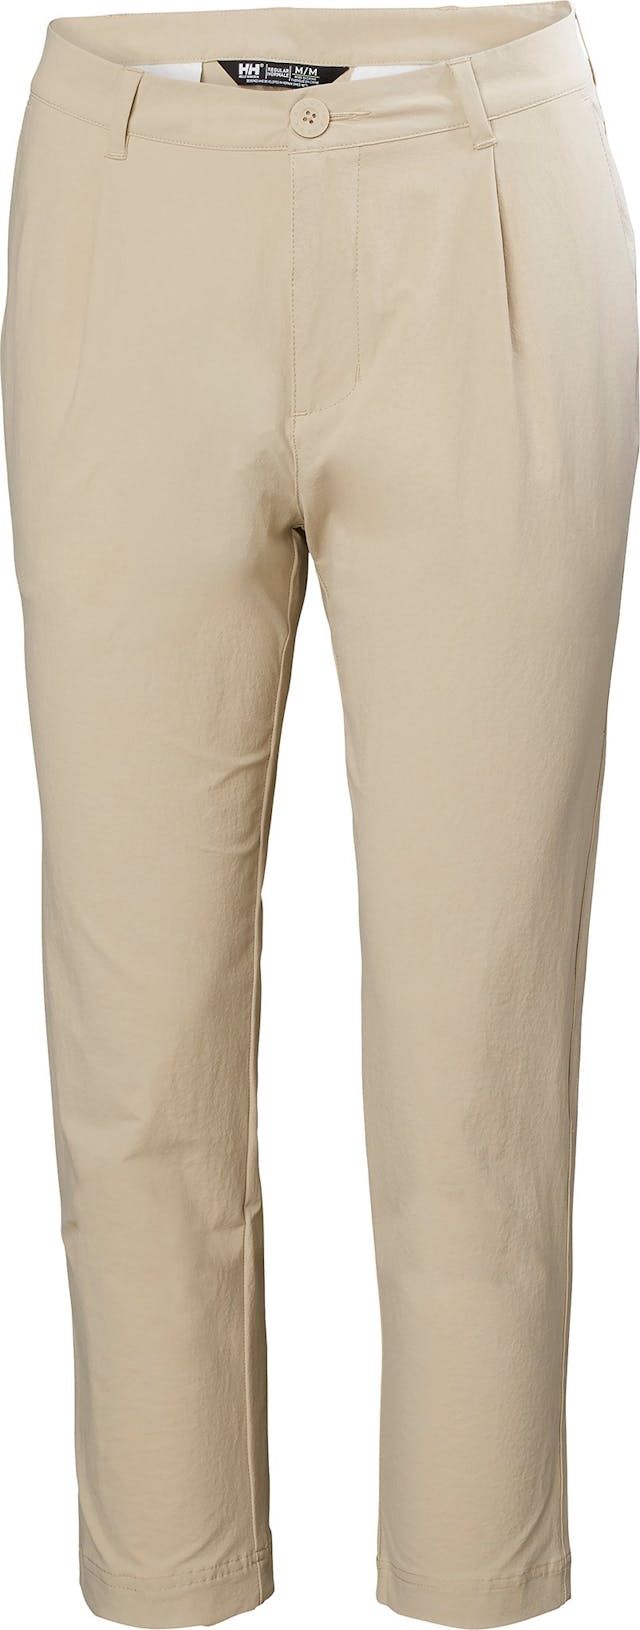 Product image for Siren Pant - Women's